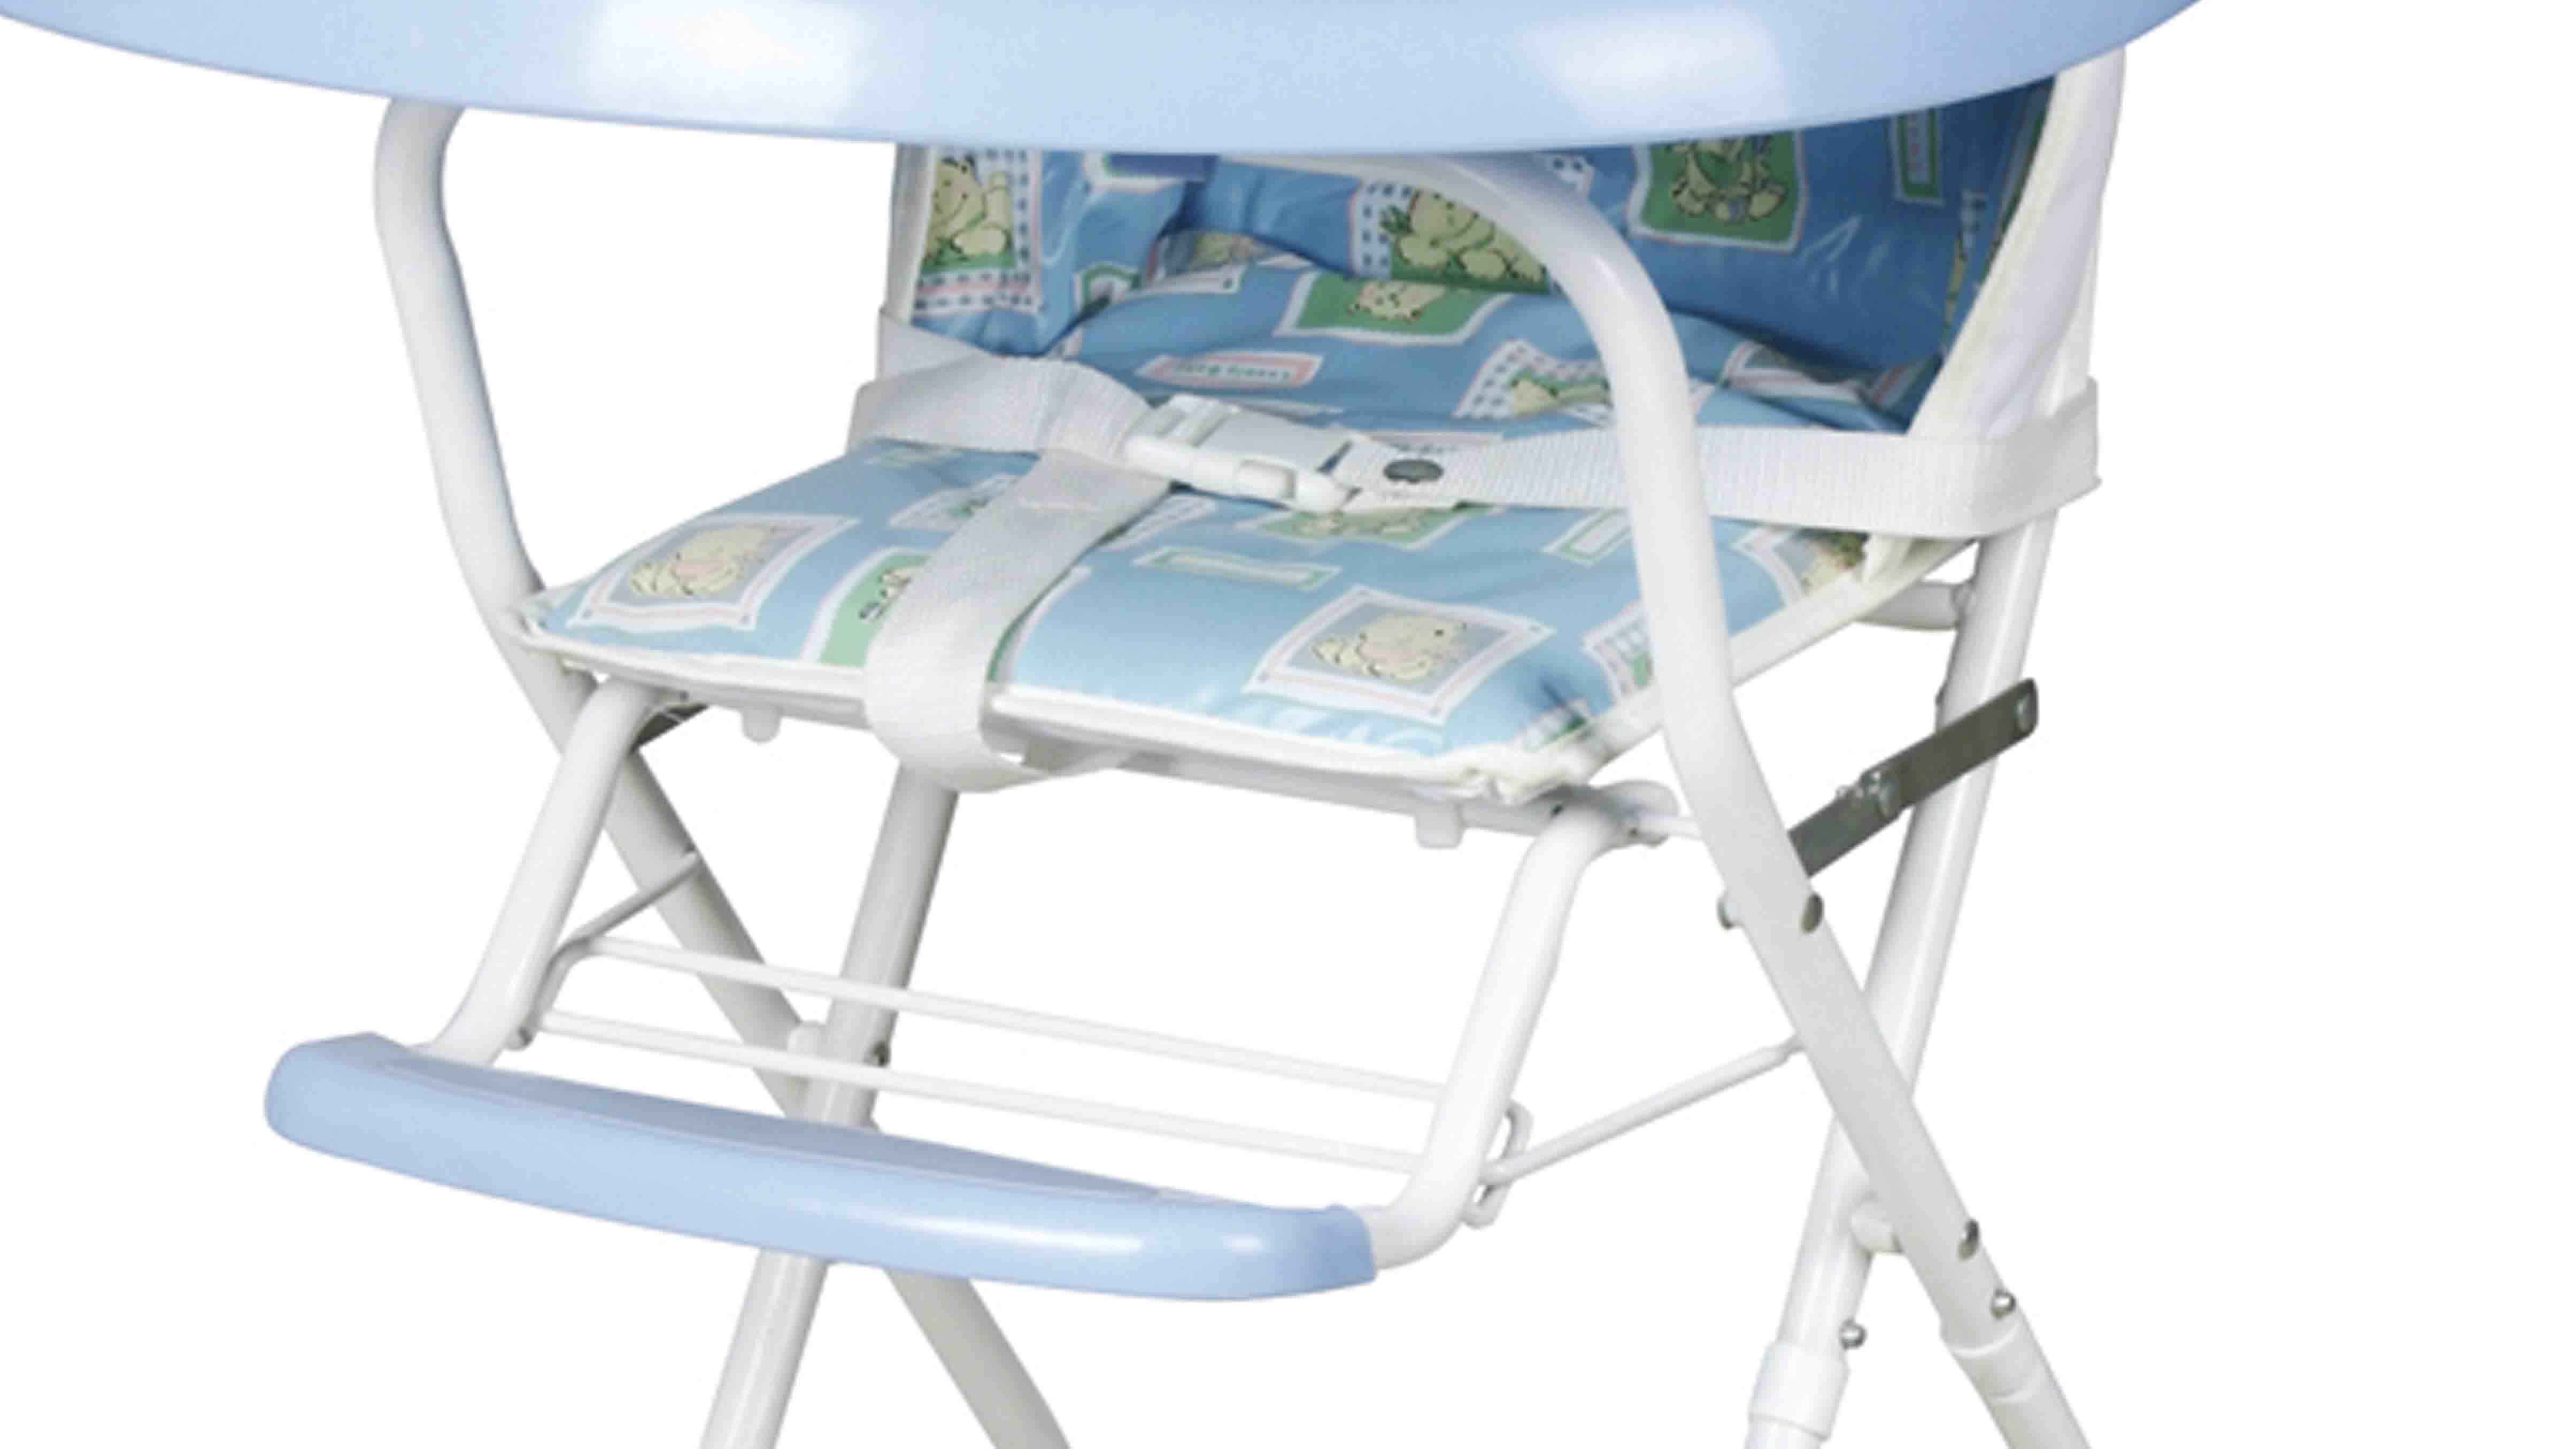 foldable adjustable high chair for babies directly sale for home